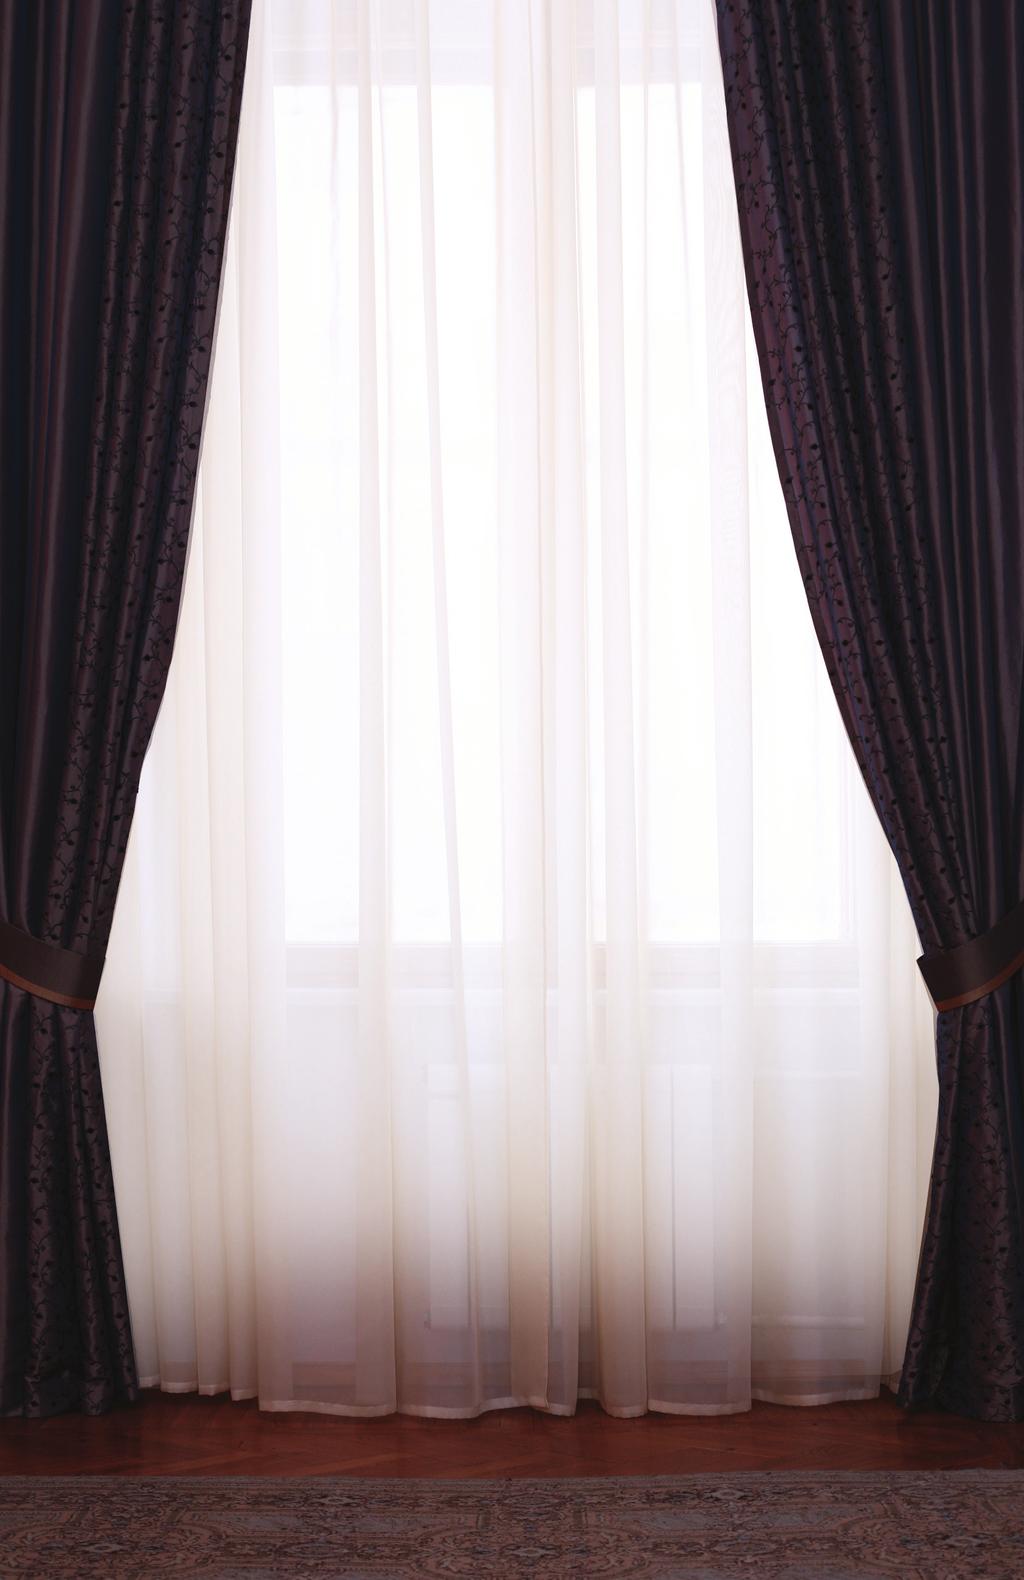 68. Close shades and drapes at night to keep heat in during the winter. 69. Make sure drapes and shades are open to catch free solar heat in the winter. 70.